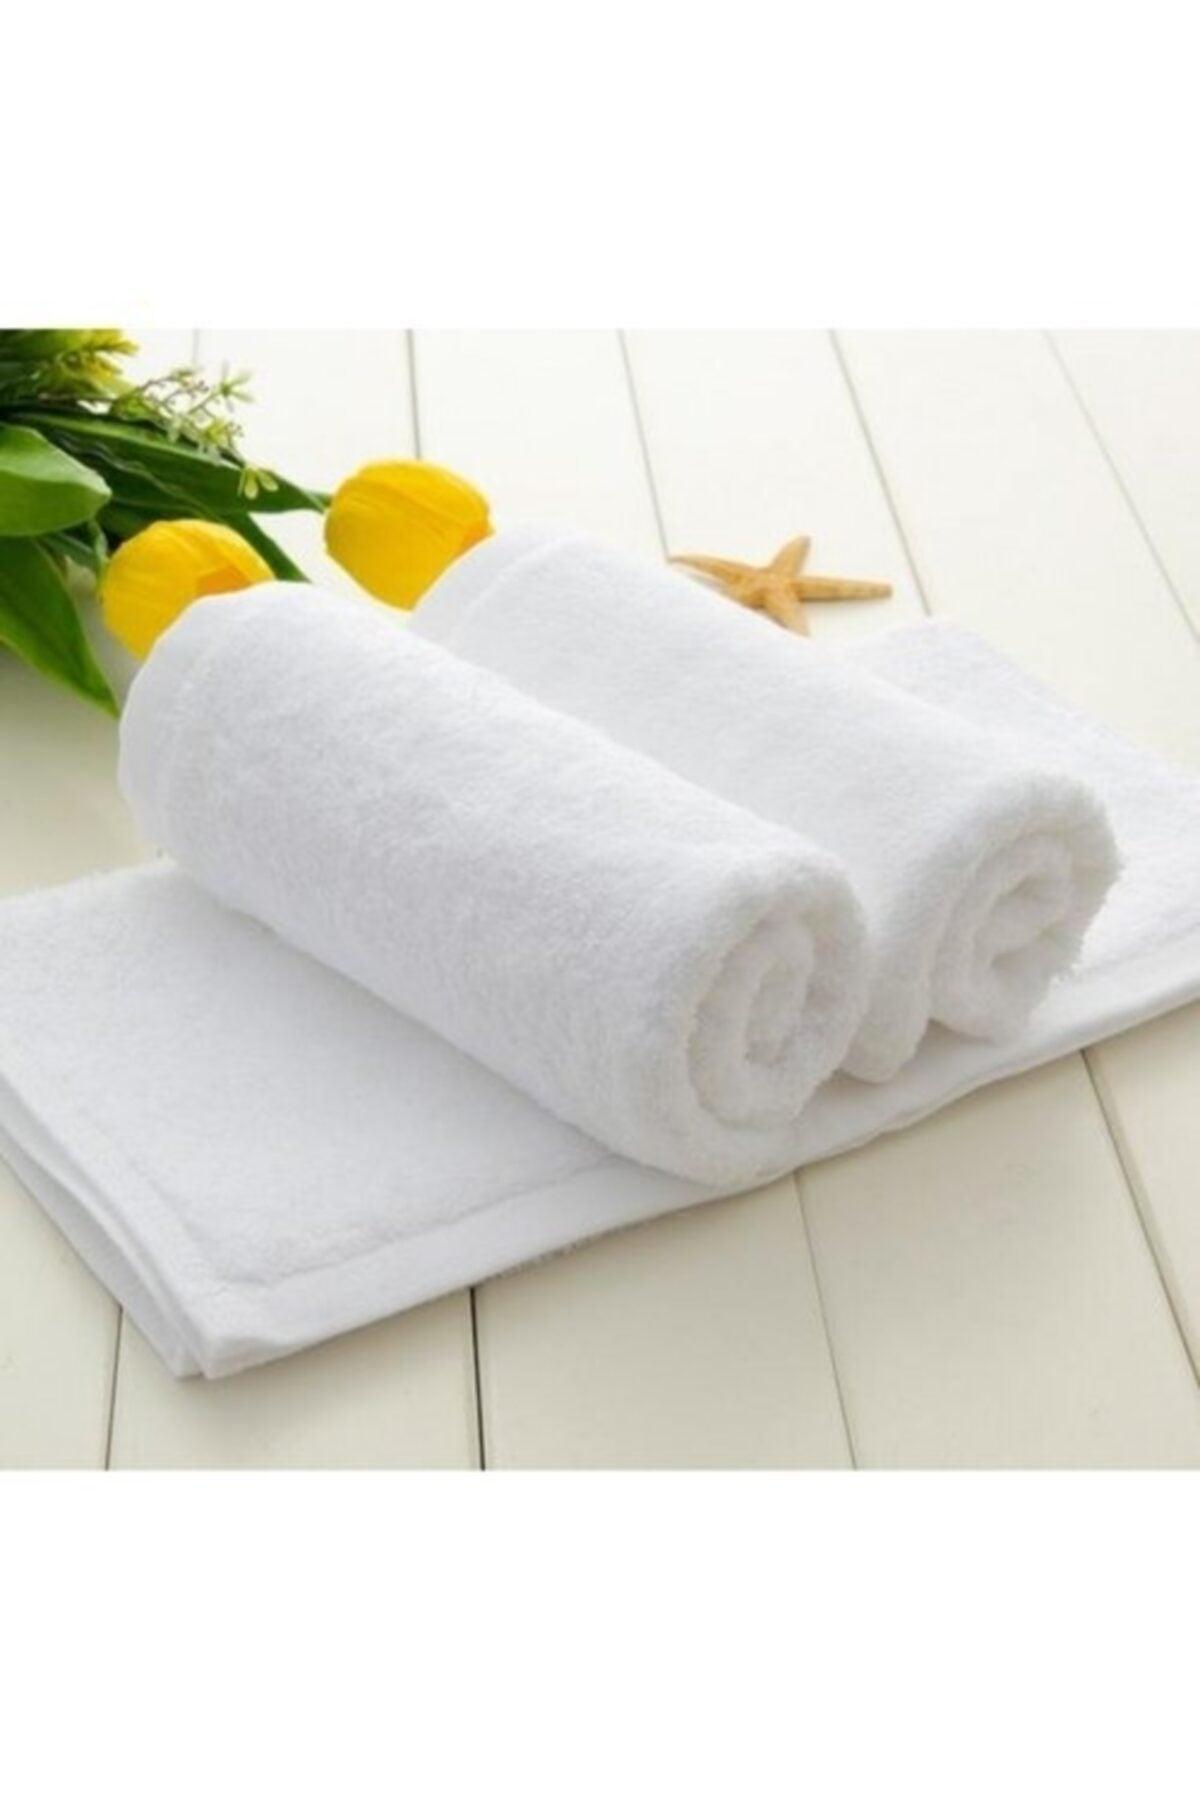 100% Cotton Hand and Face Towel Set of 6 White Towels 30x50 - Swordslife